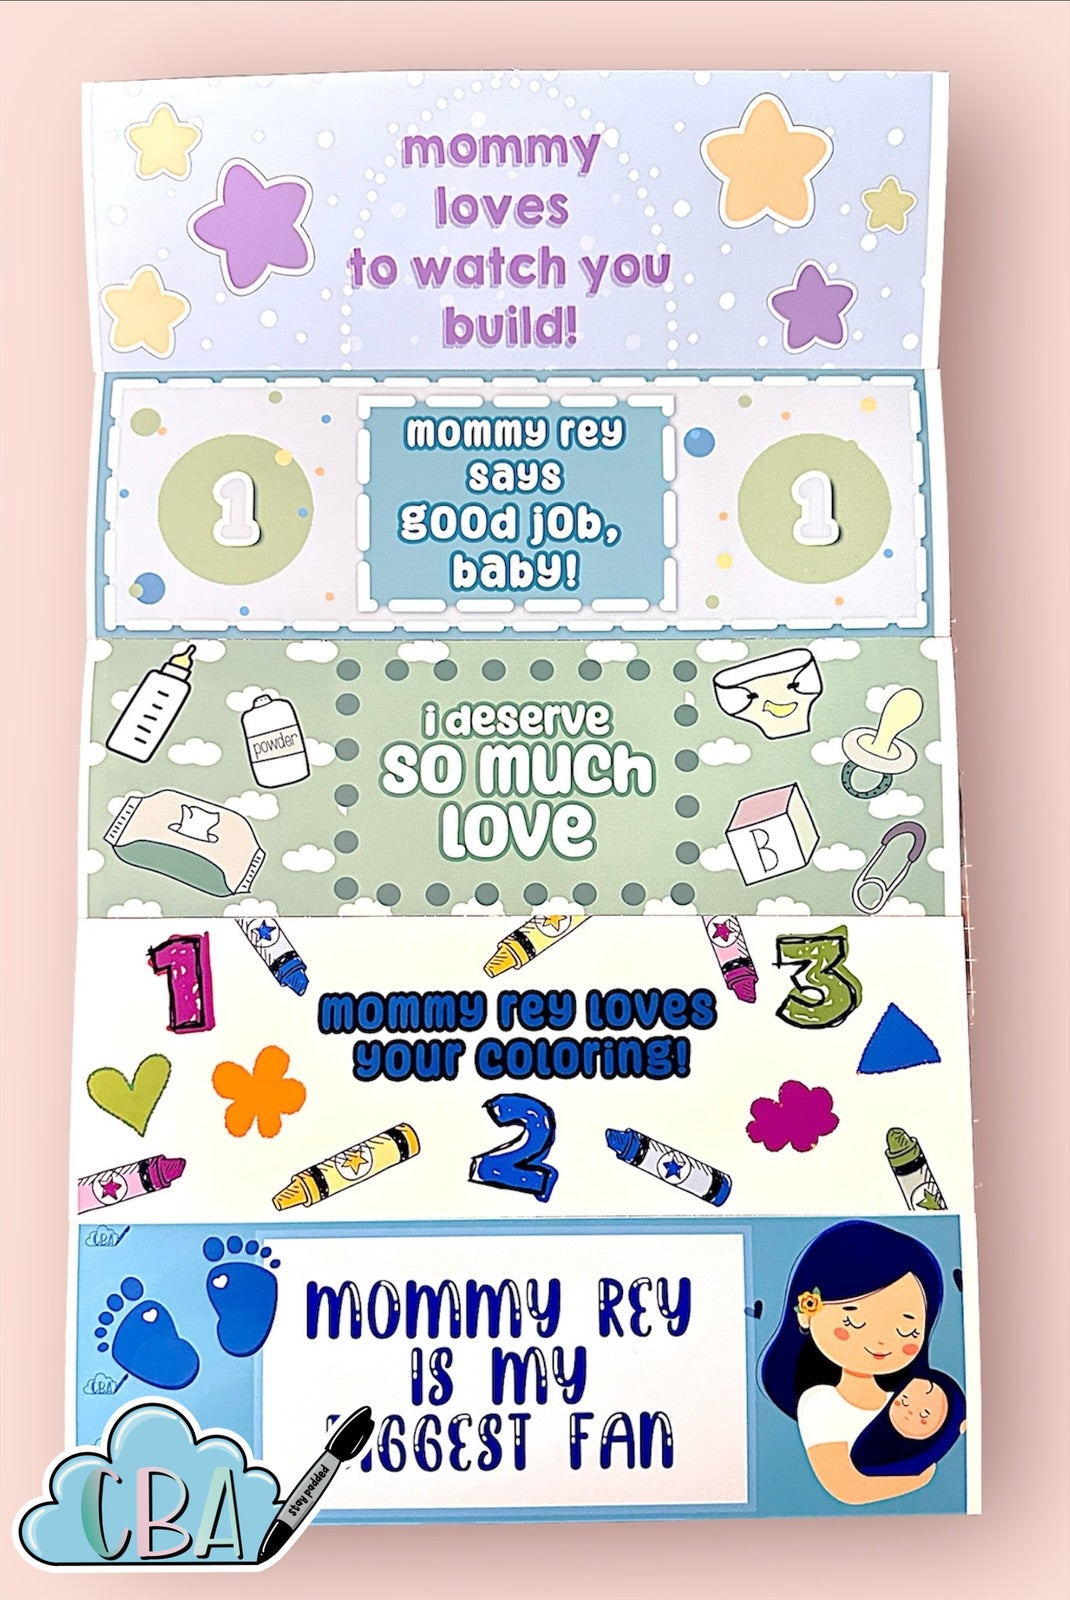 ABDL Diaper Tapes x10, “The Little Space Encouragement Pack"